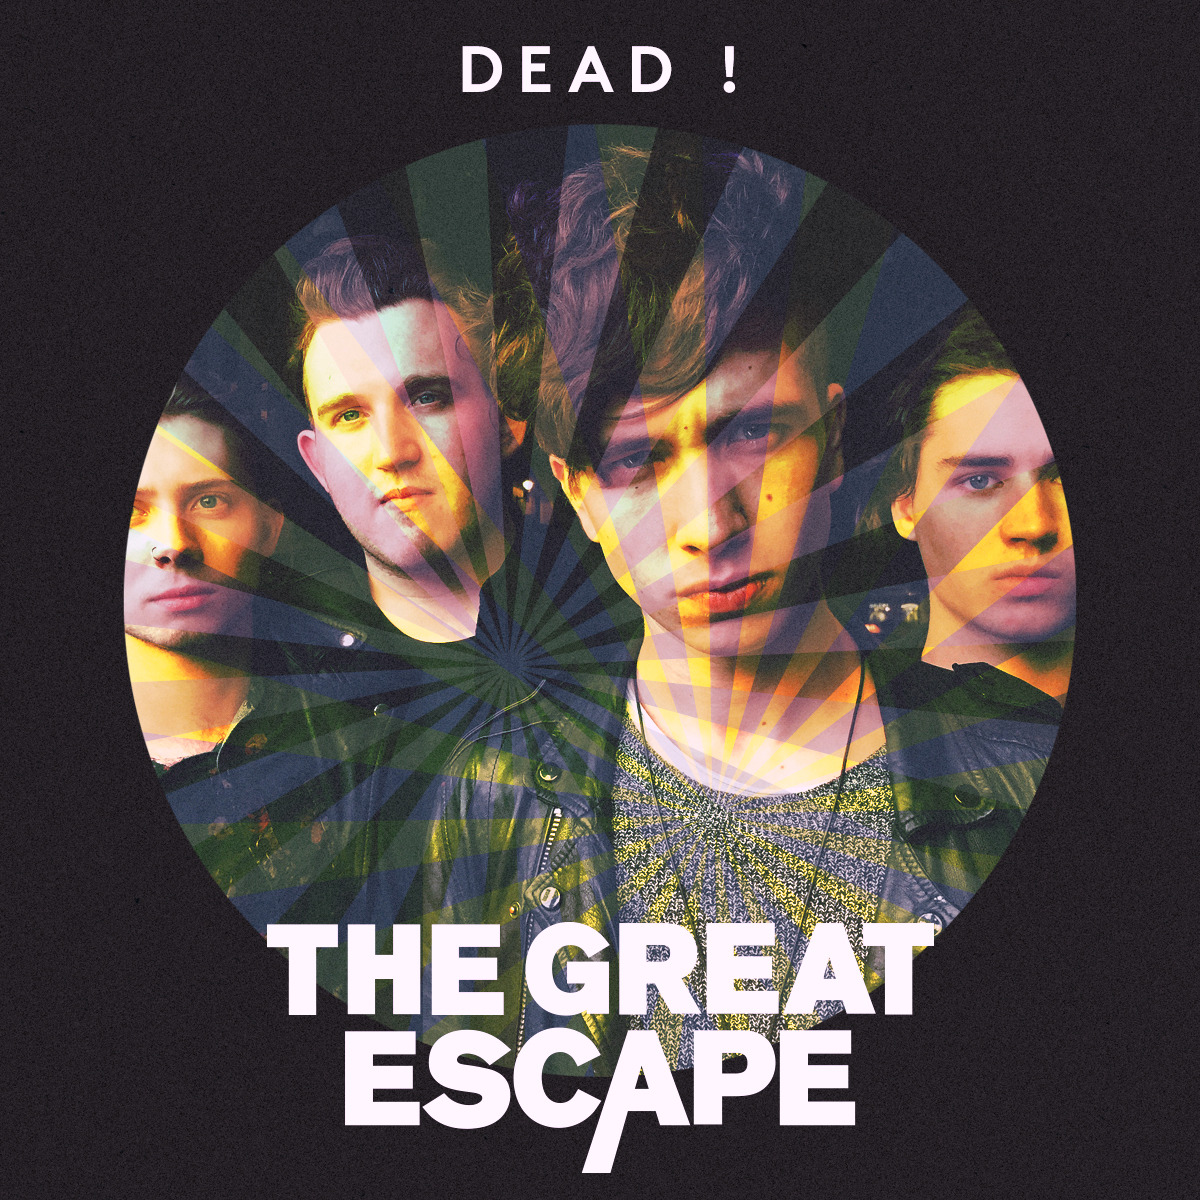 THE GREAT ESCAPE IS DEAD! Just announced Brighton’s Great Escape Festival 19-21st of May. Can’t say when we’re on yet but rumour is we’ve got a midnight basement party slot….
Tickets on the tour tab X